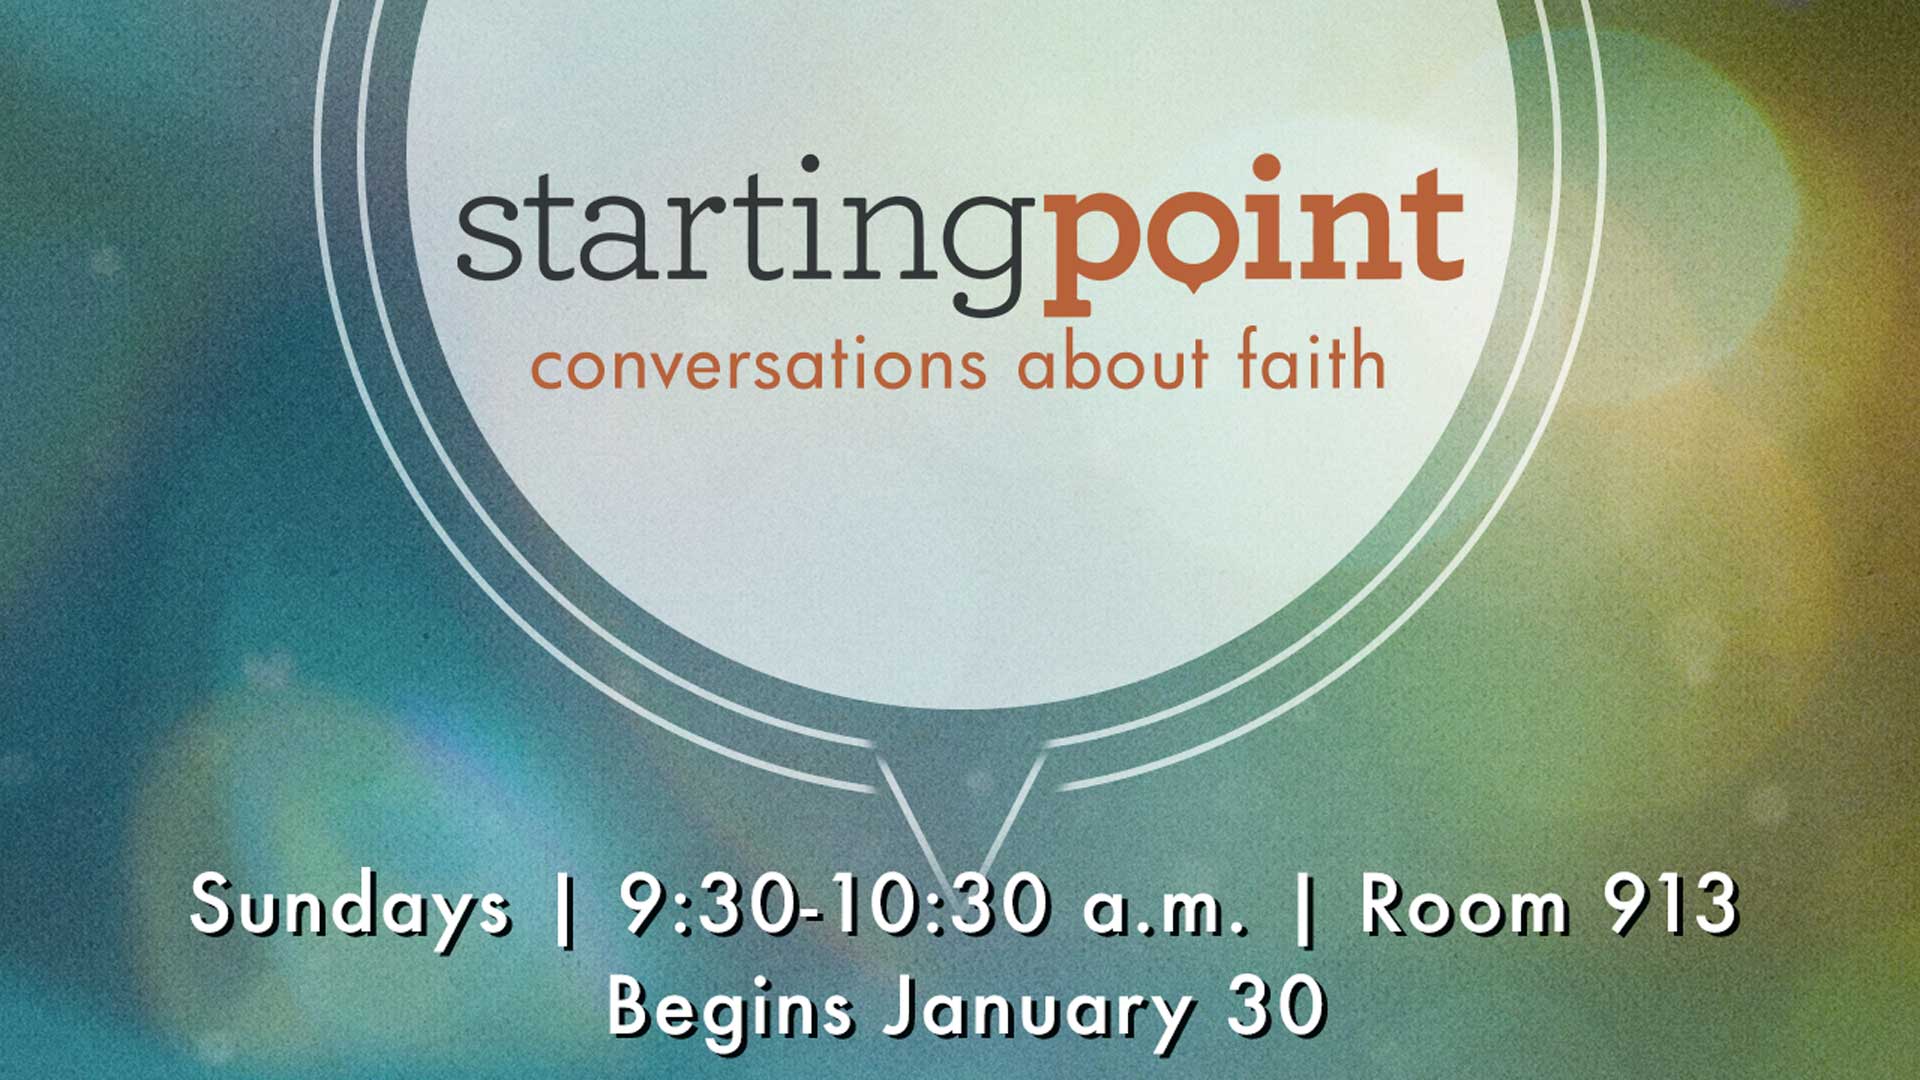 Starting Point: Conversations About Faith, begins January 30 from 9:30-10:30 a.m. in room 913